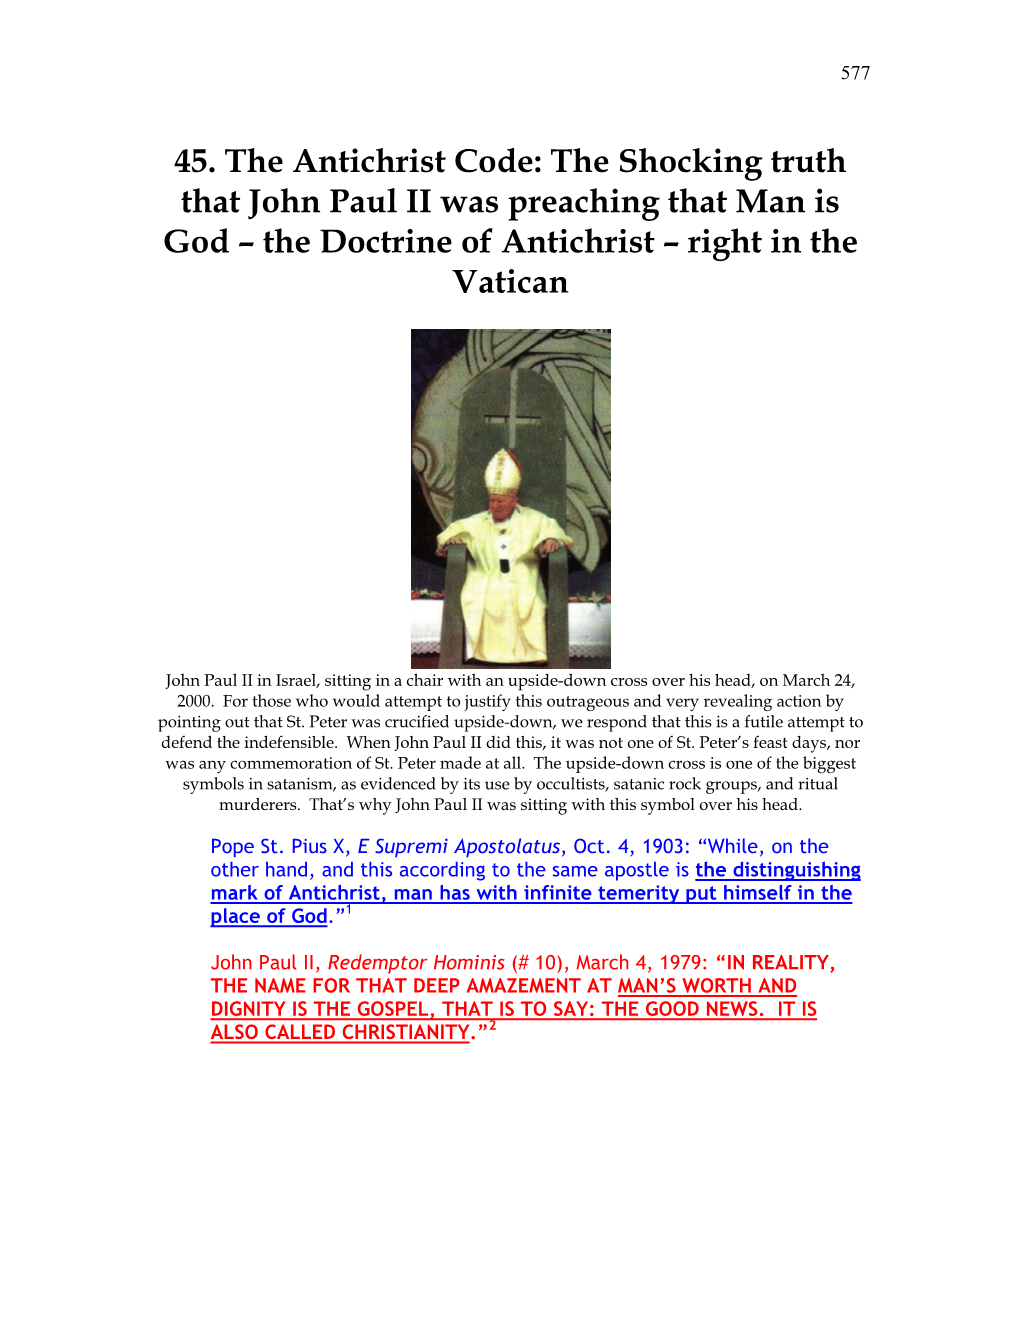 45. the Antichrist Code: the Shocking Truth That John Paul II Was Preaching That Man Is God – the Doctrine of Antichrist – Right in the Vatican